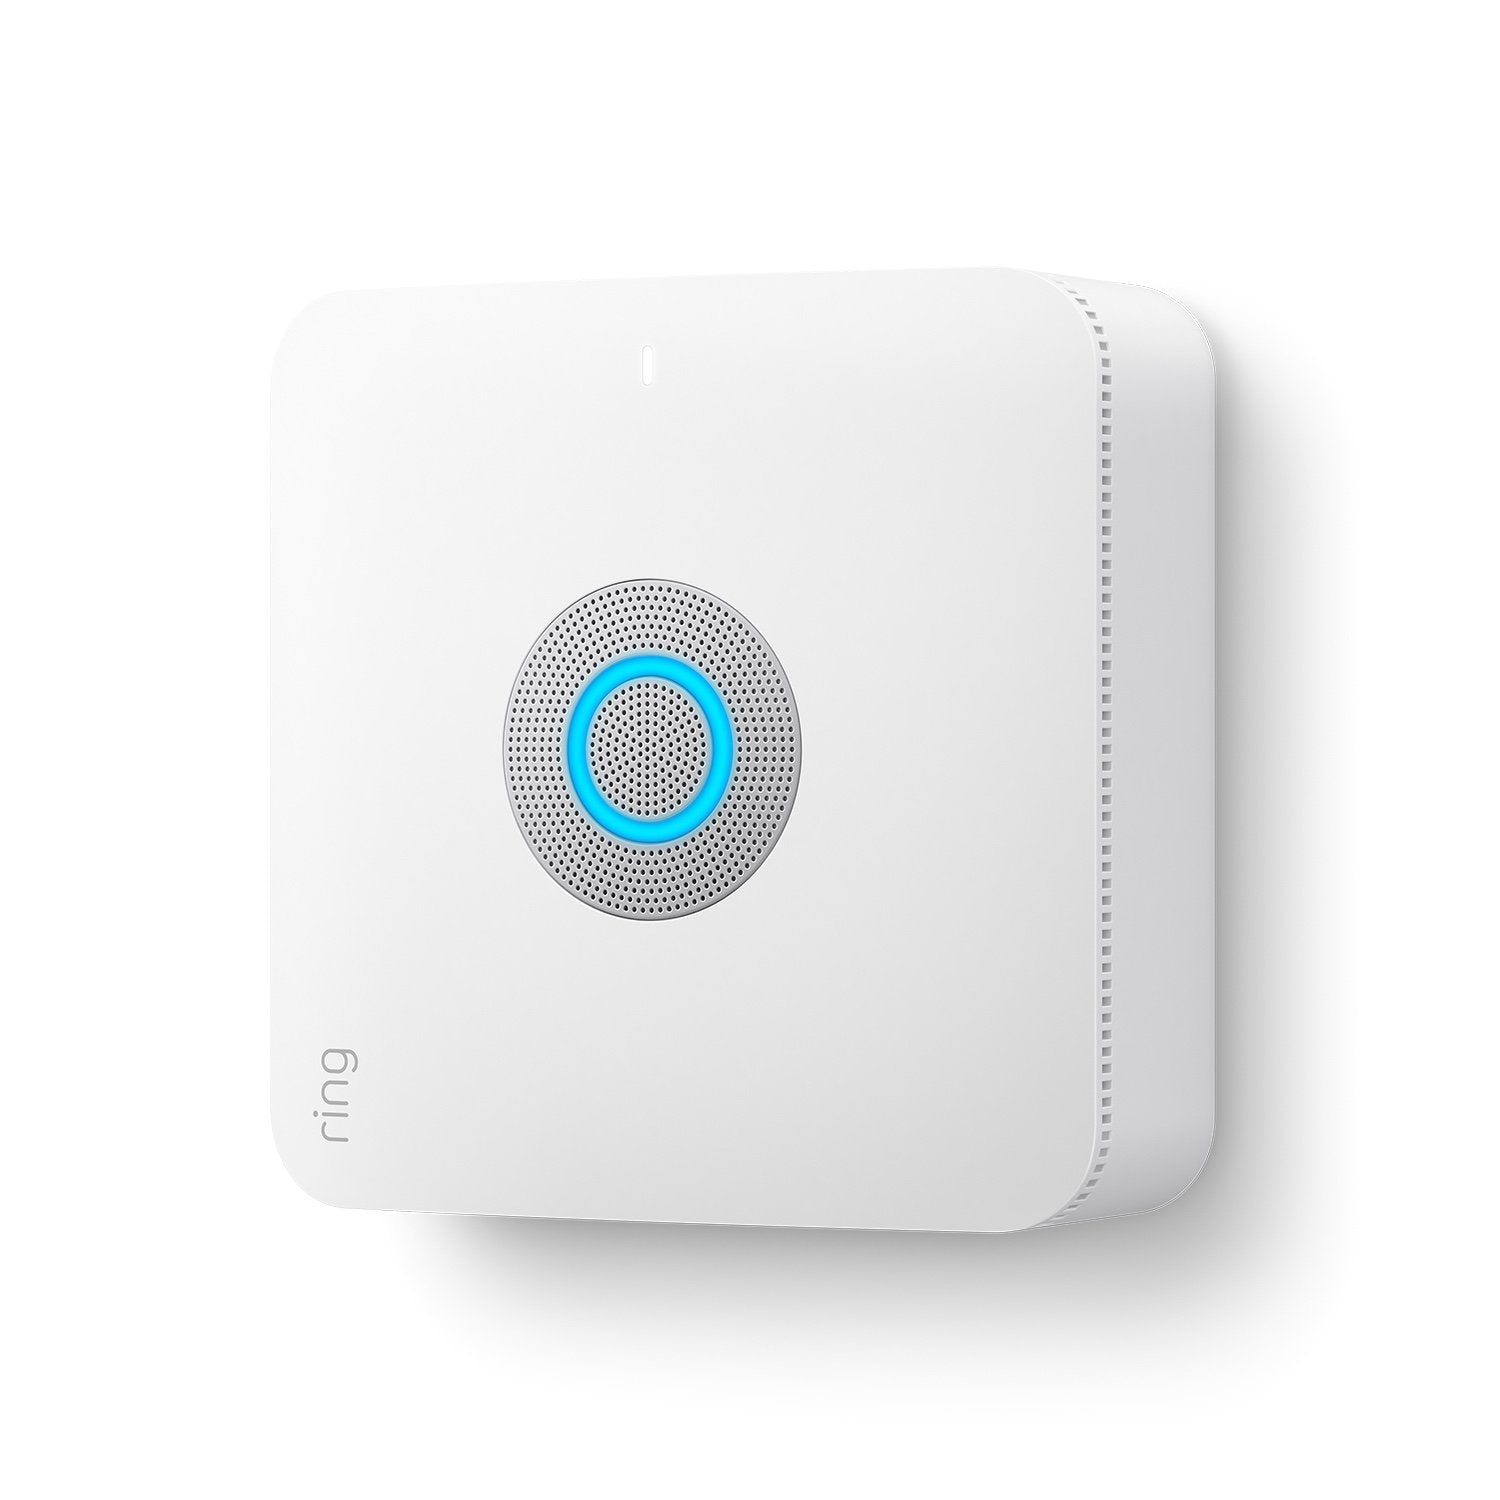 Alarm Pro Base Station (for with built-in eero Wi-Fi 6 router) - White:Alarm Pro Base Station (for with built-in eero Wi-Fi 6 router)